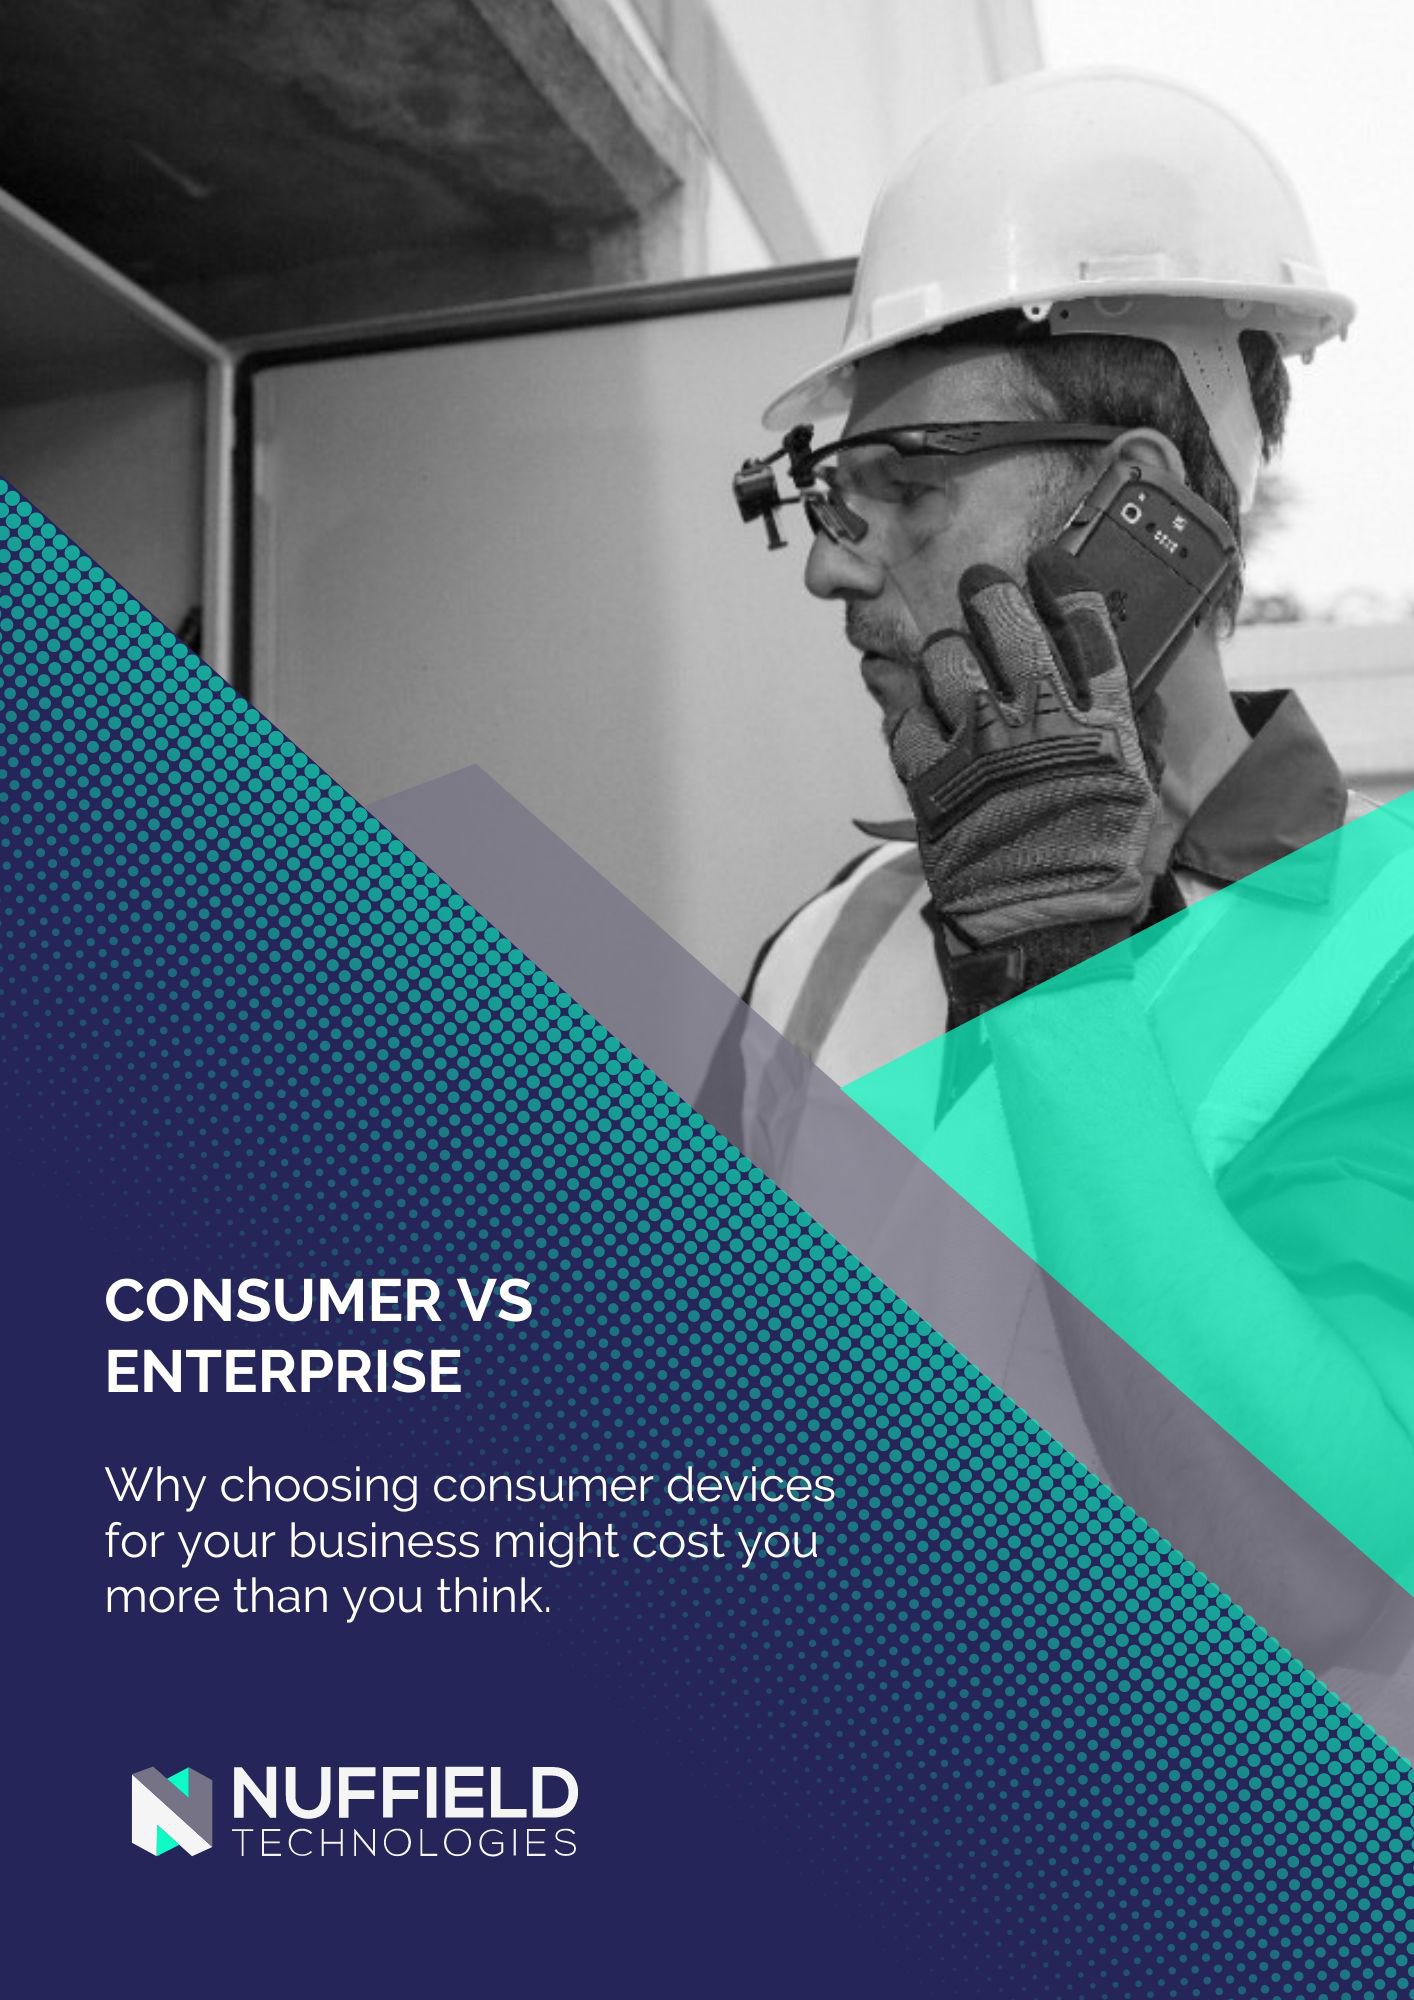 Consumer Vs Enterprise: Why choosing consumer devices for your business might cost you more than you think cover